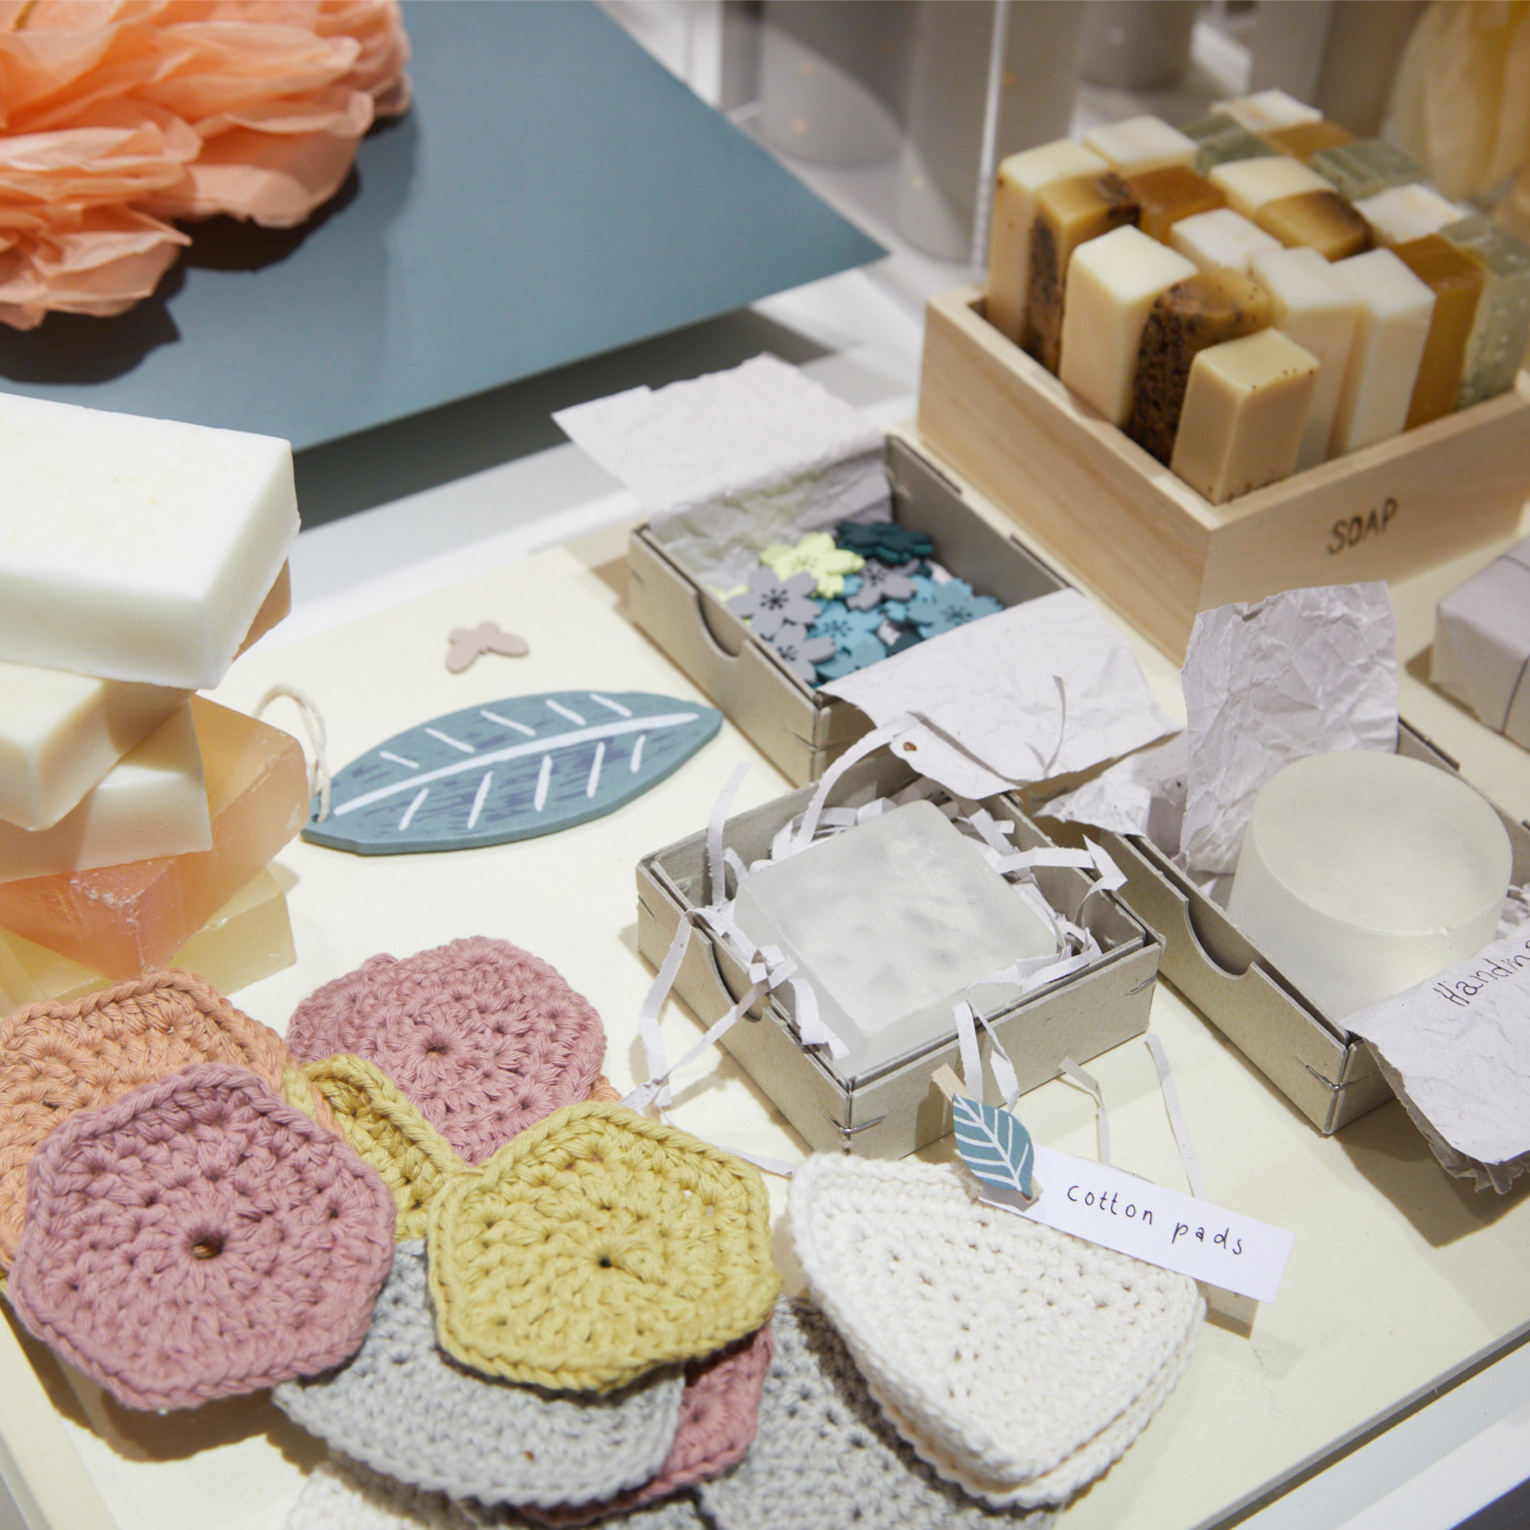 Sustainable products at Creativeworld: soaps and cotton pads